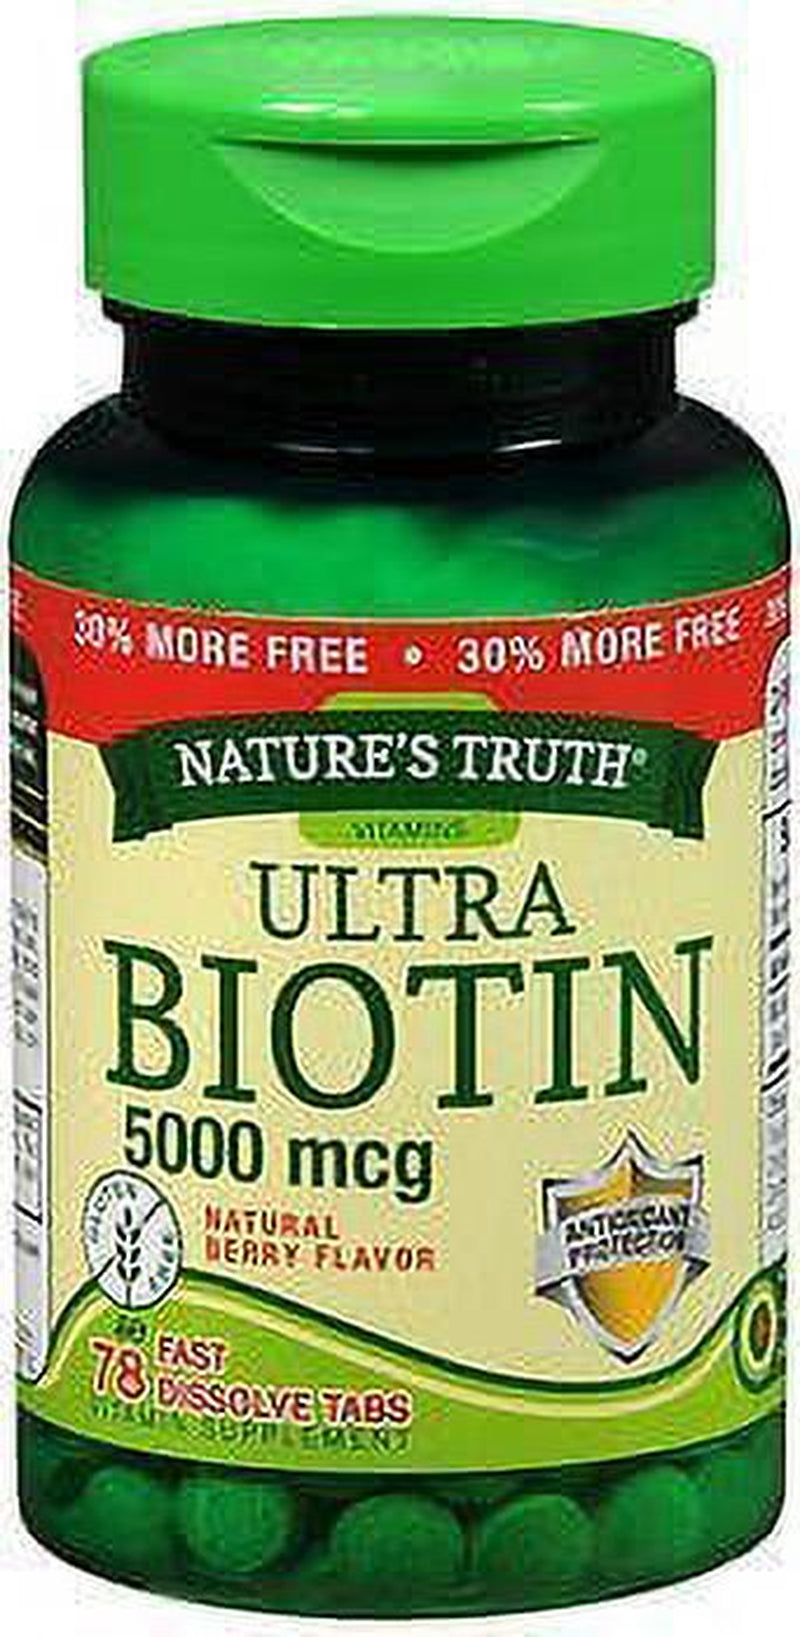 Natures Truth Ultra Biotin Fast Dissolve Tablets Natural Berry Flavor (Pack of 4)